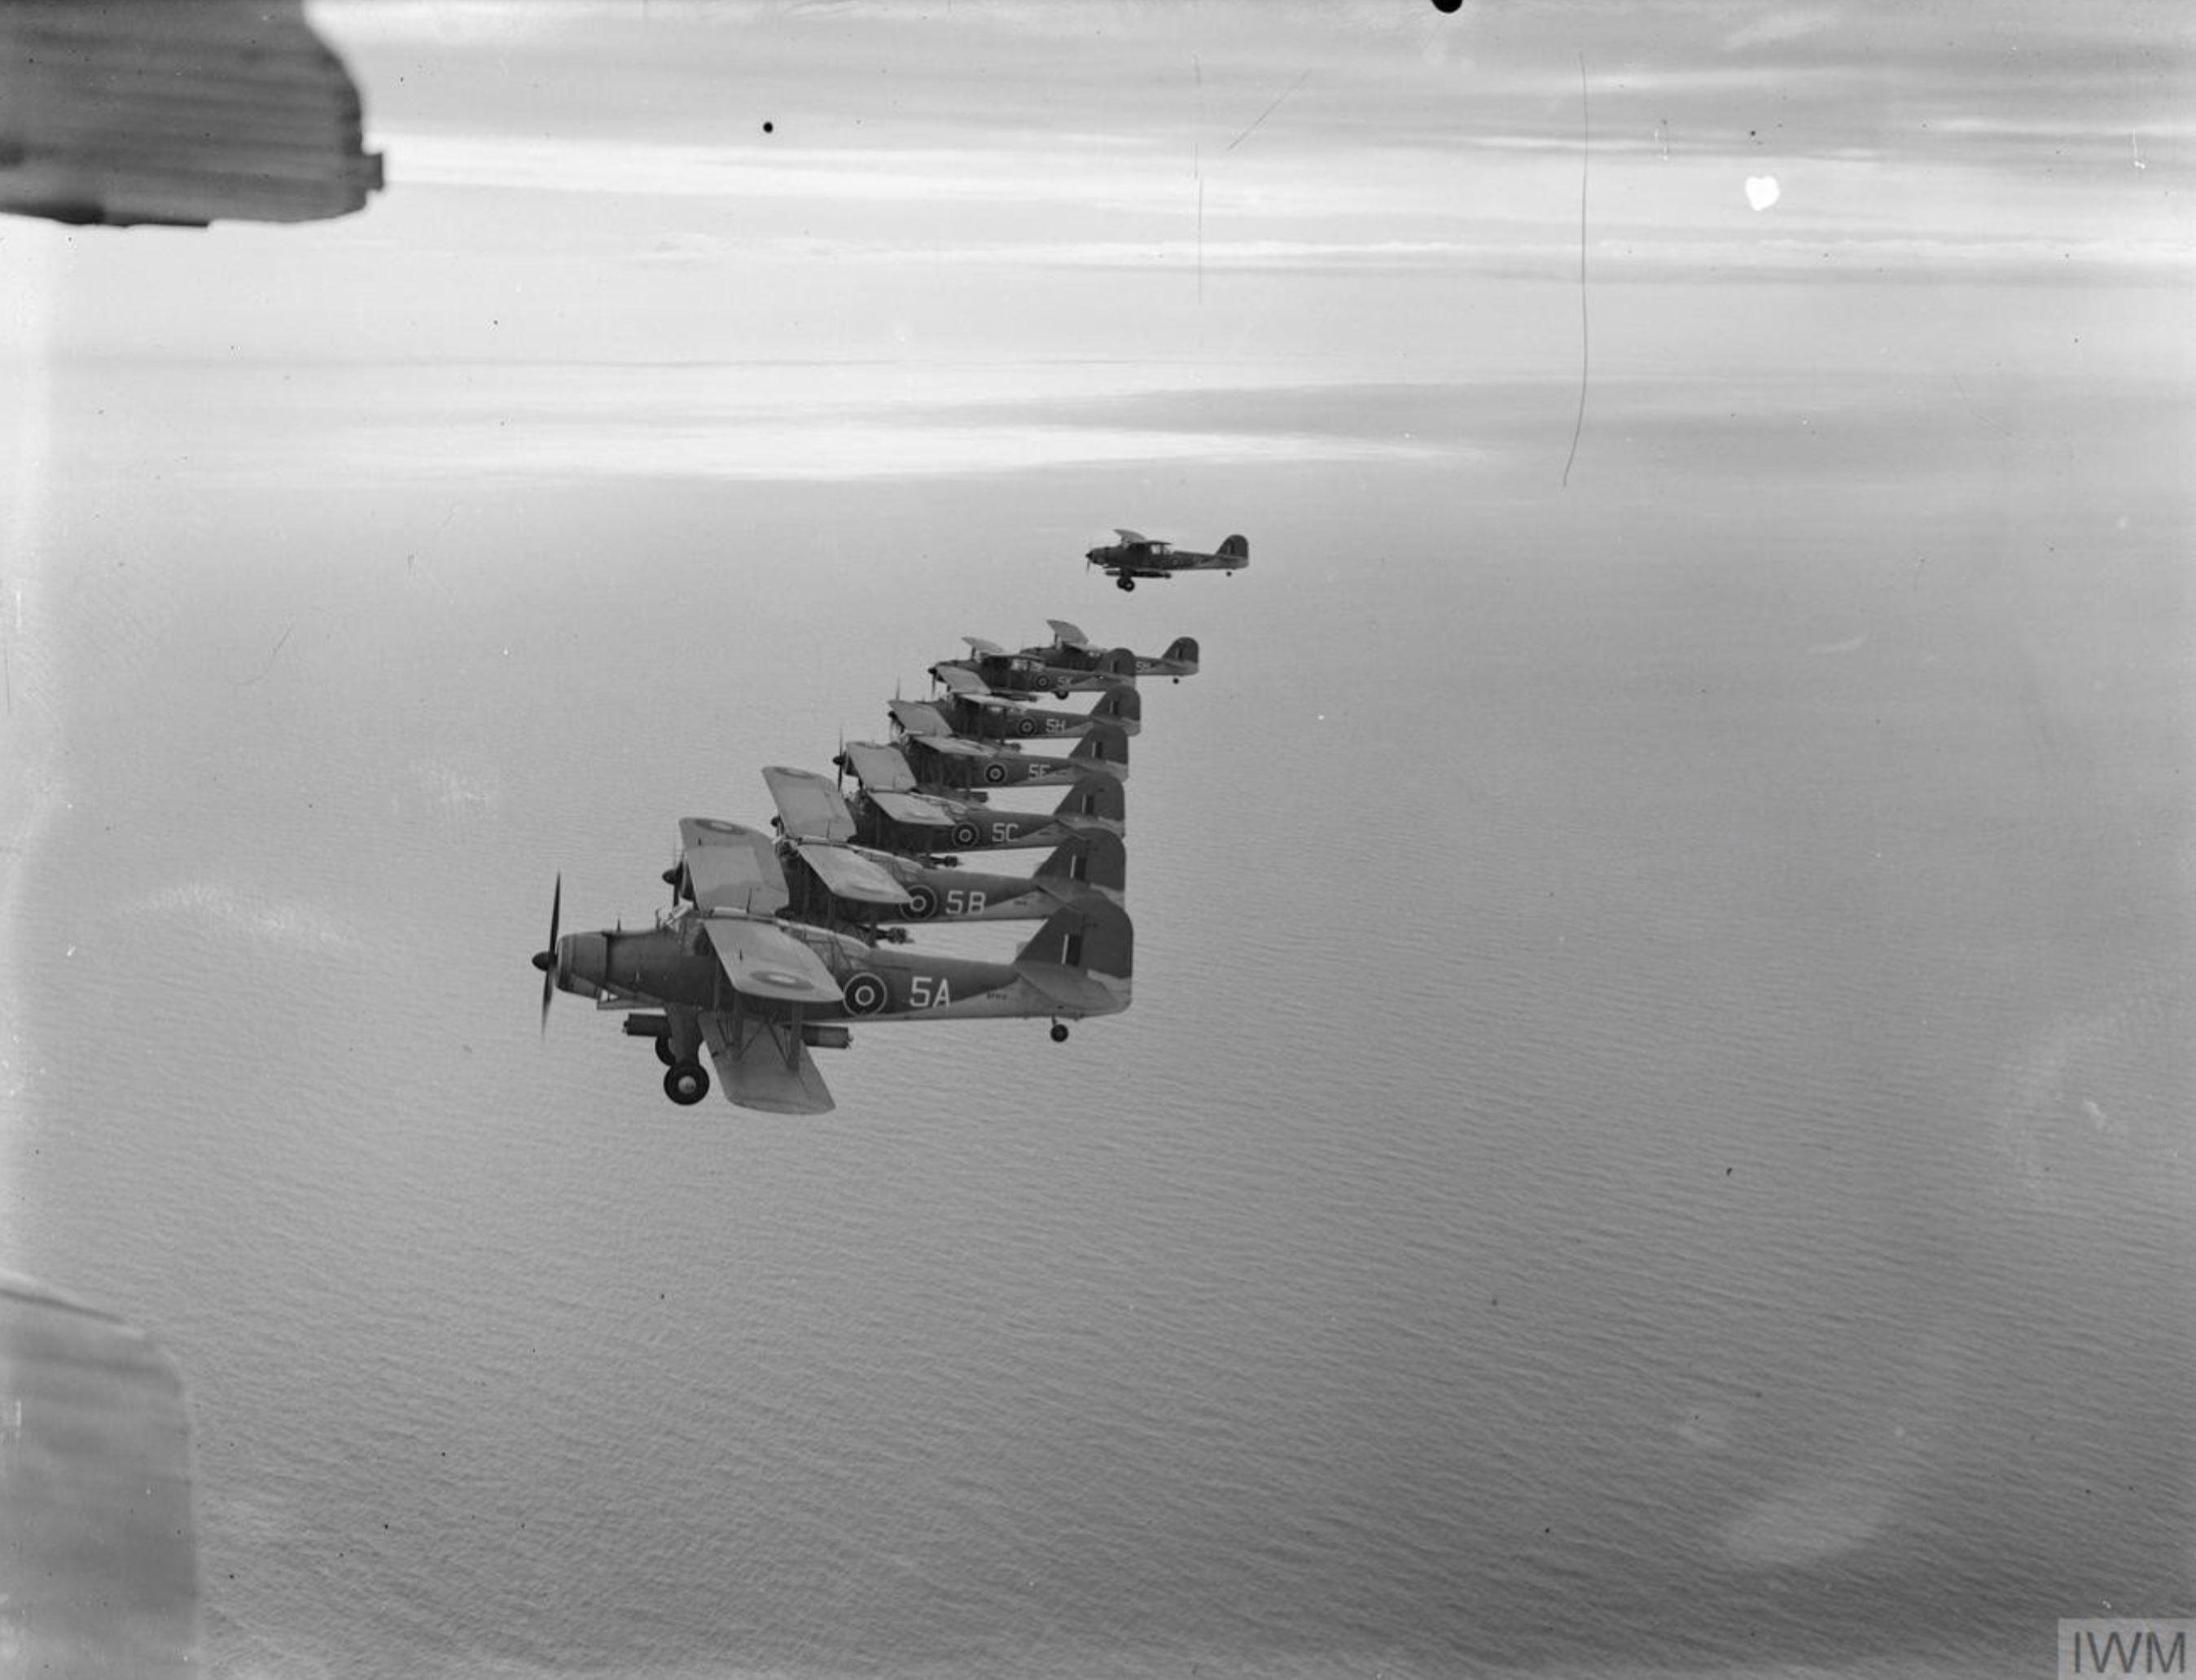 Fleet Air Arm Fairey Albacore starting out on an exercise carrying torpedoes 22nd Jun 1942 IWM A10688